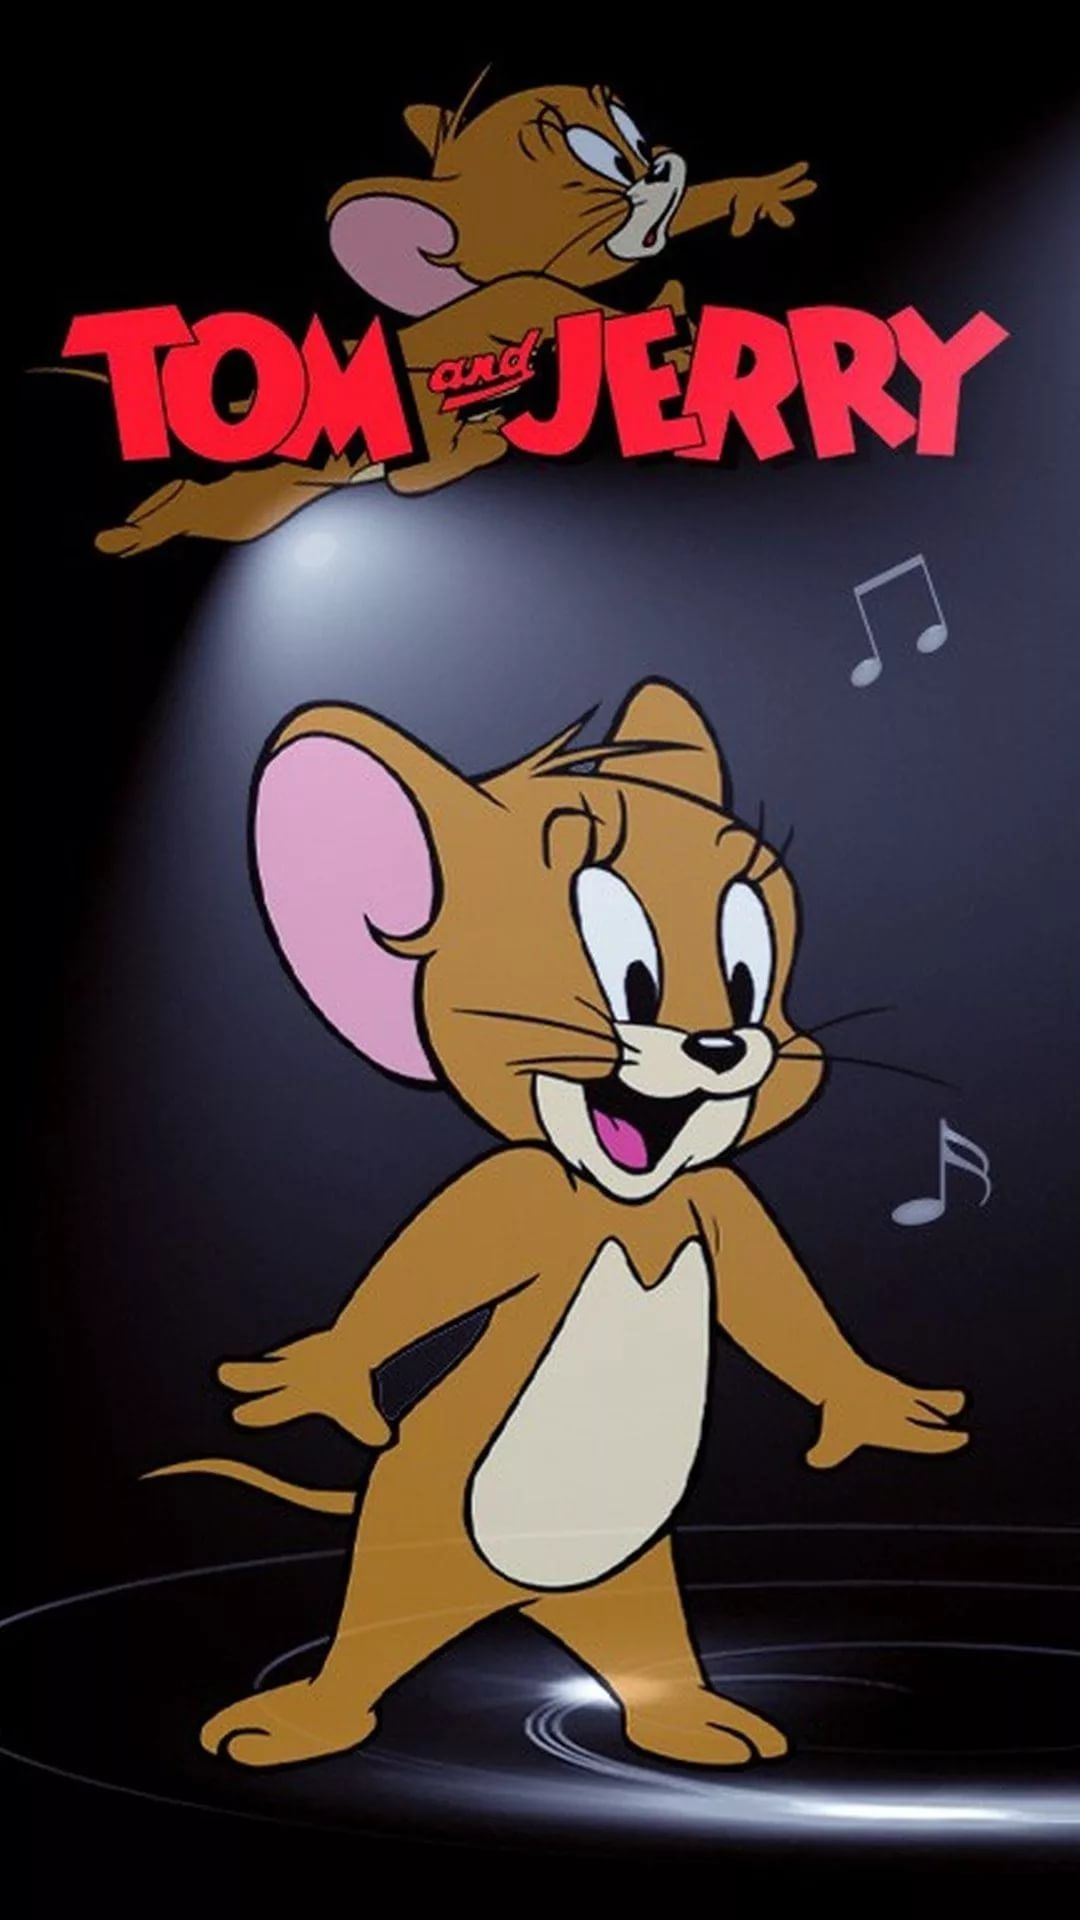 15 Tom and Jerry iPhone Wallpapers - Wallpaperboat